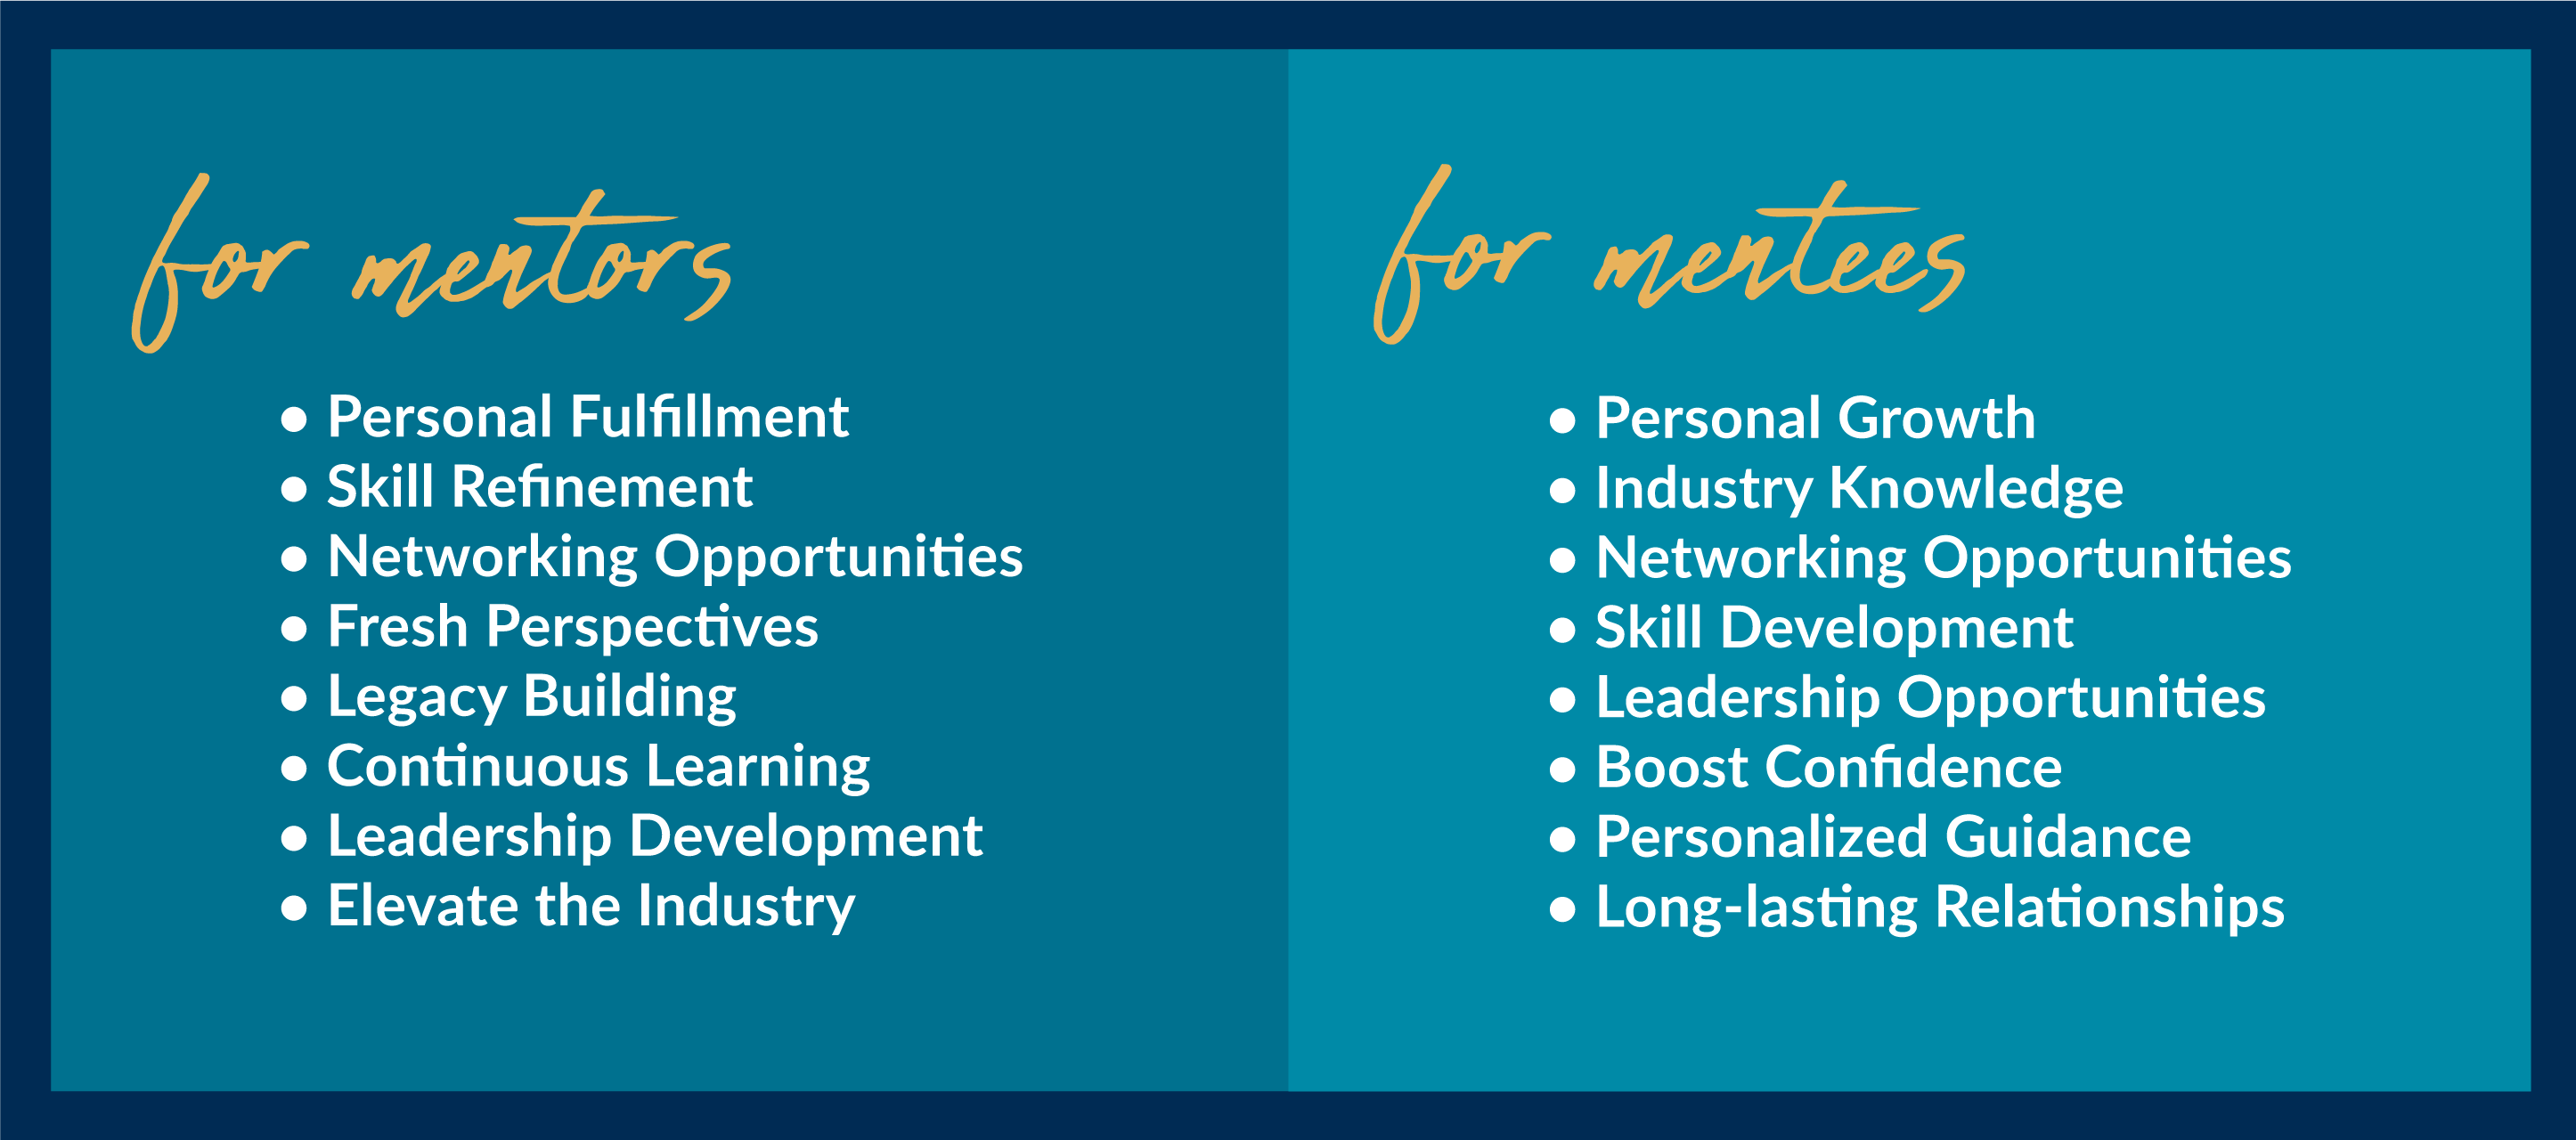 For Mentors: ⦁ Personal Fulfillment ⦁ Skill Refinement ⦁ Networking Opportunities ⦁ Fresh Perspective ⦁ Legacy Building ⦁ Continuous Learning ⦁ Leadership Development ⦁ Elevate the Industry - and - For Mentees: ⦁ Personal Growth ⦁ Industry Knowledge ⦁ Networking Opportunities ⦁ Skill Development ⦁ Leadership Opportunities ⦁ Boost Confidence ⦁ Personalized Guidance ⦁ Long-lasting Relationships